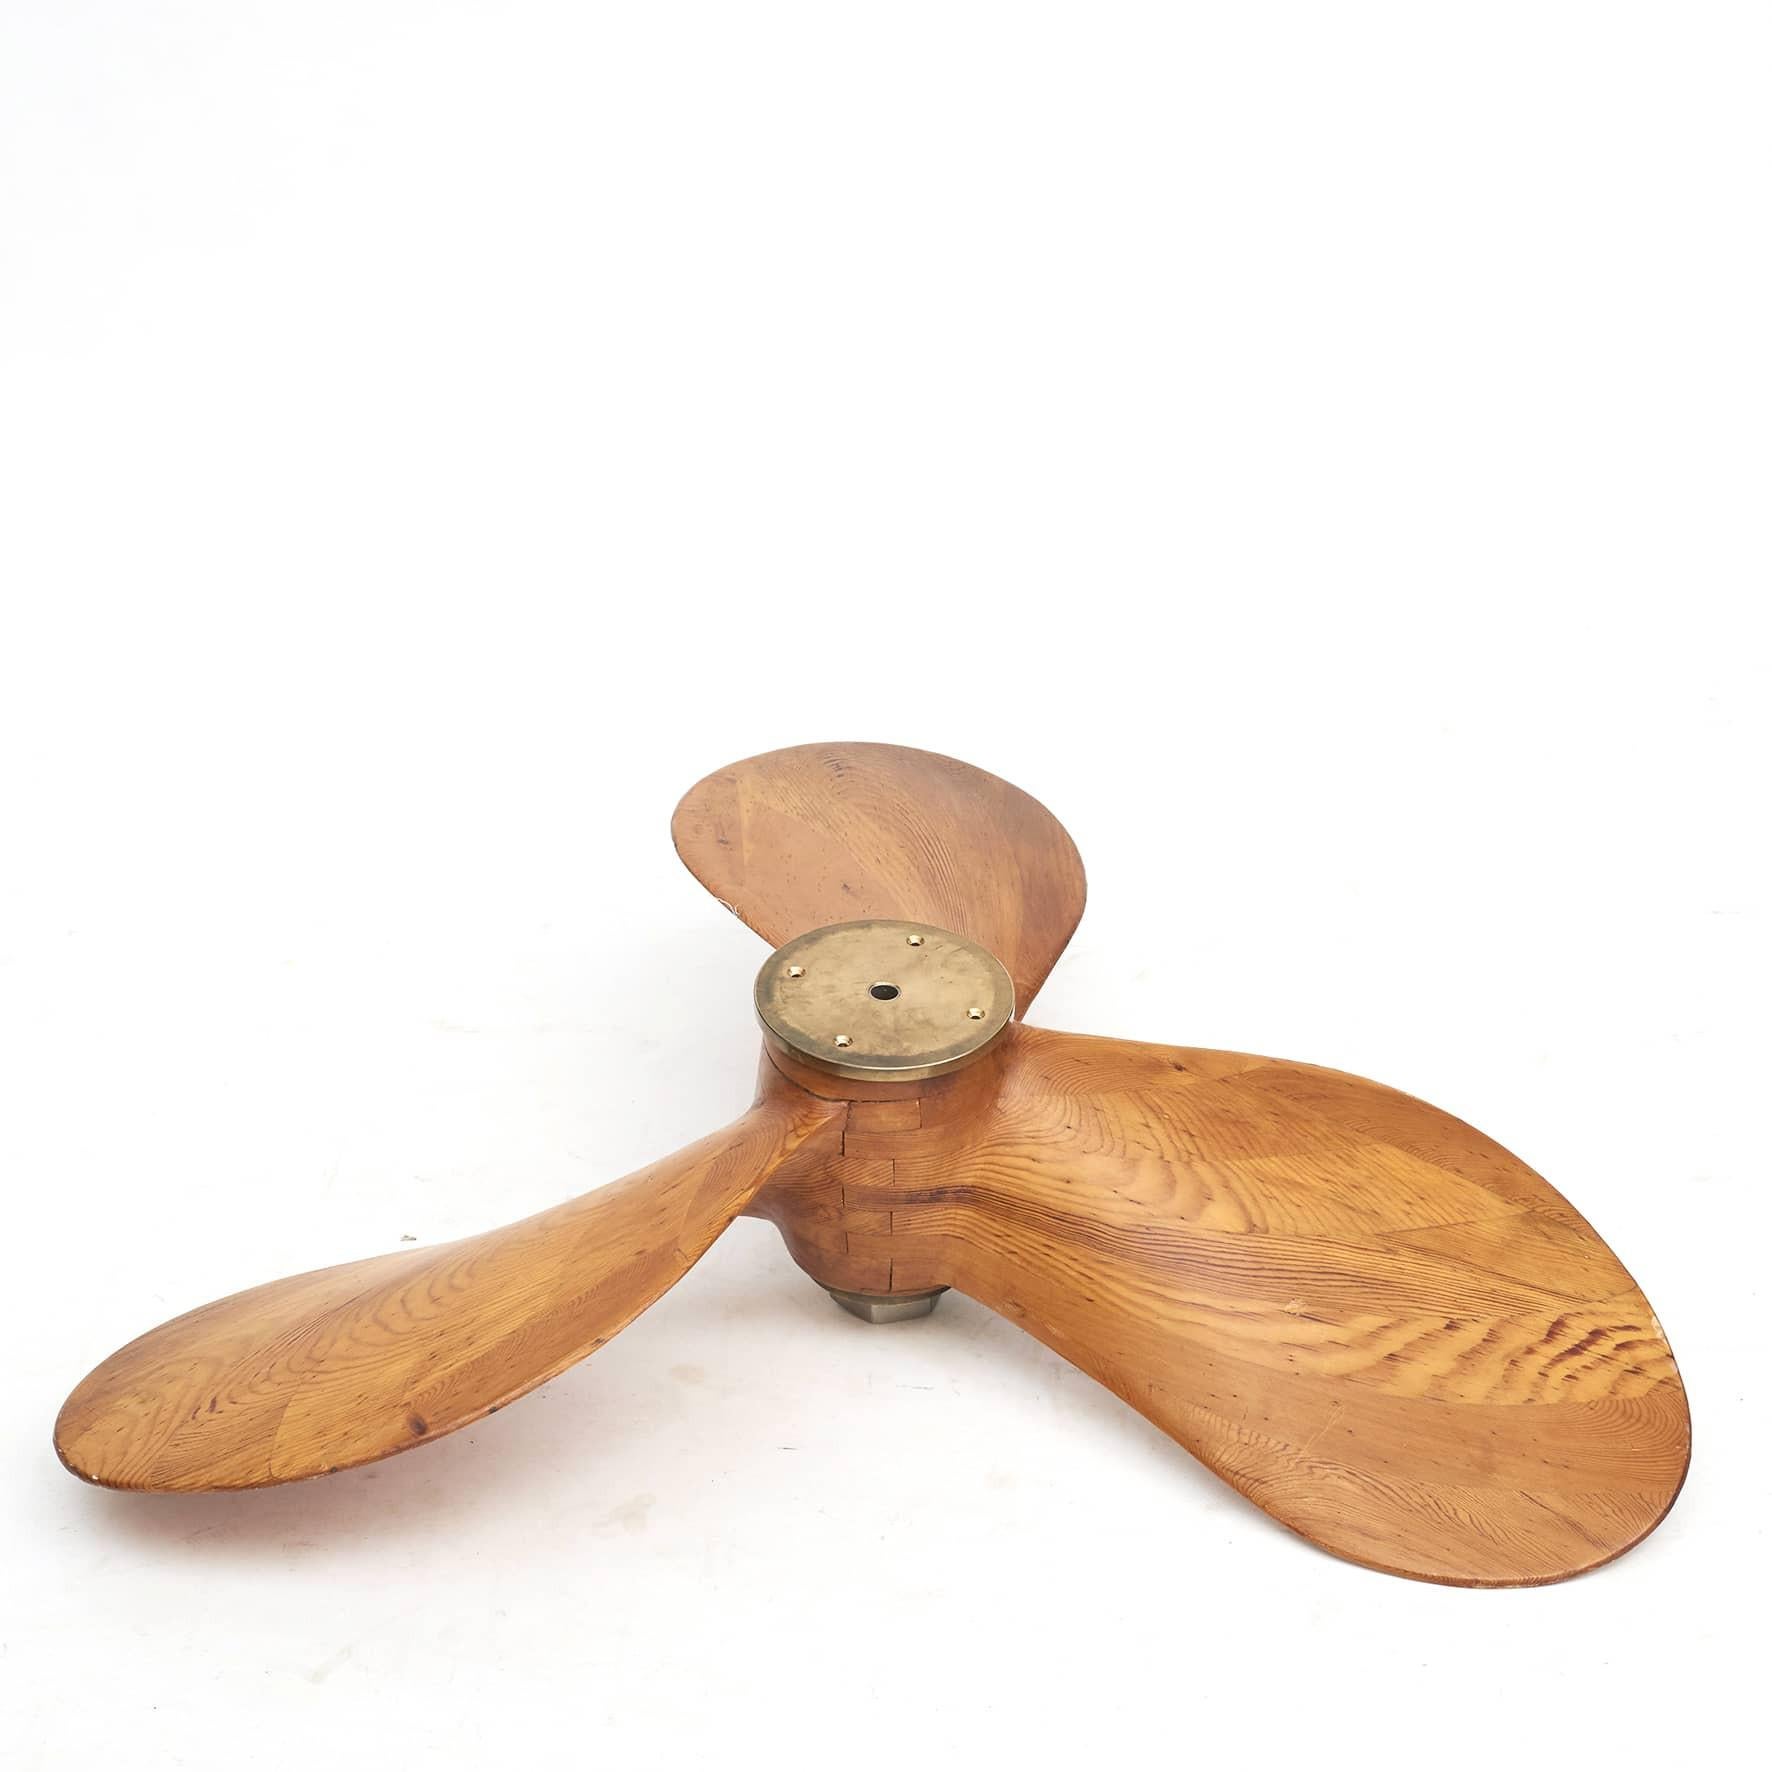 A high carpentry quality pine model of a three-blade ship’s propeller.
Denmark c. 1950.
Special mounted so it can be hung on the wall.

With craftsmanship at its very best this propeller is truly a sculptural and decorative piece.